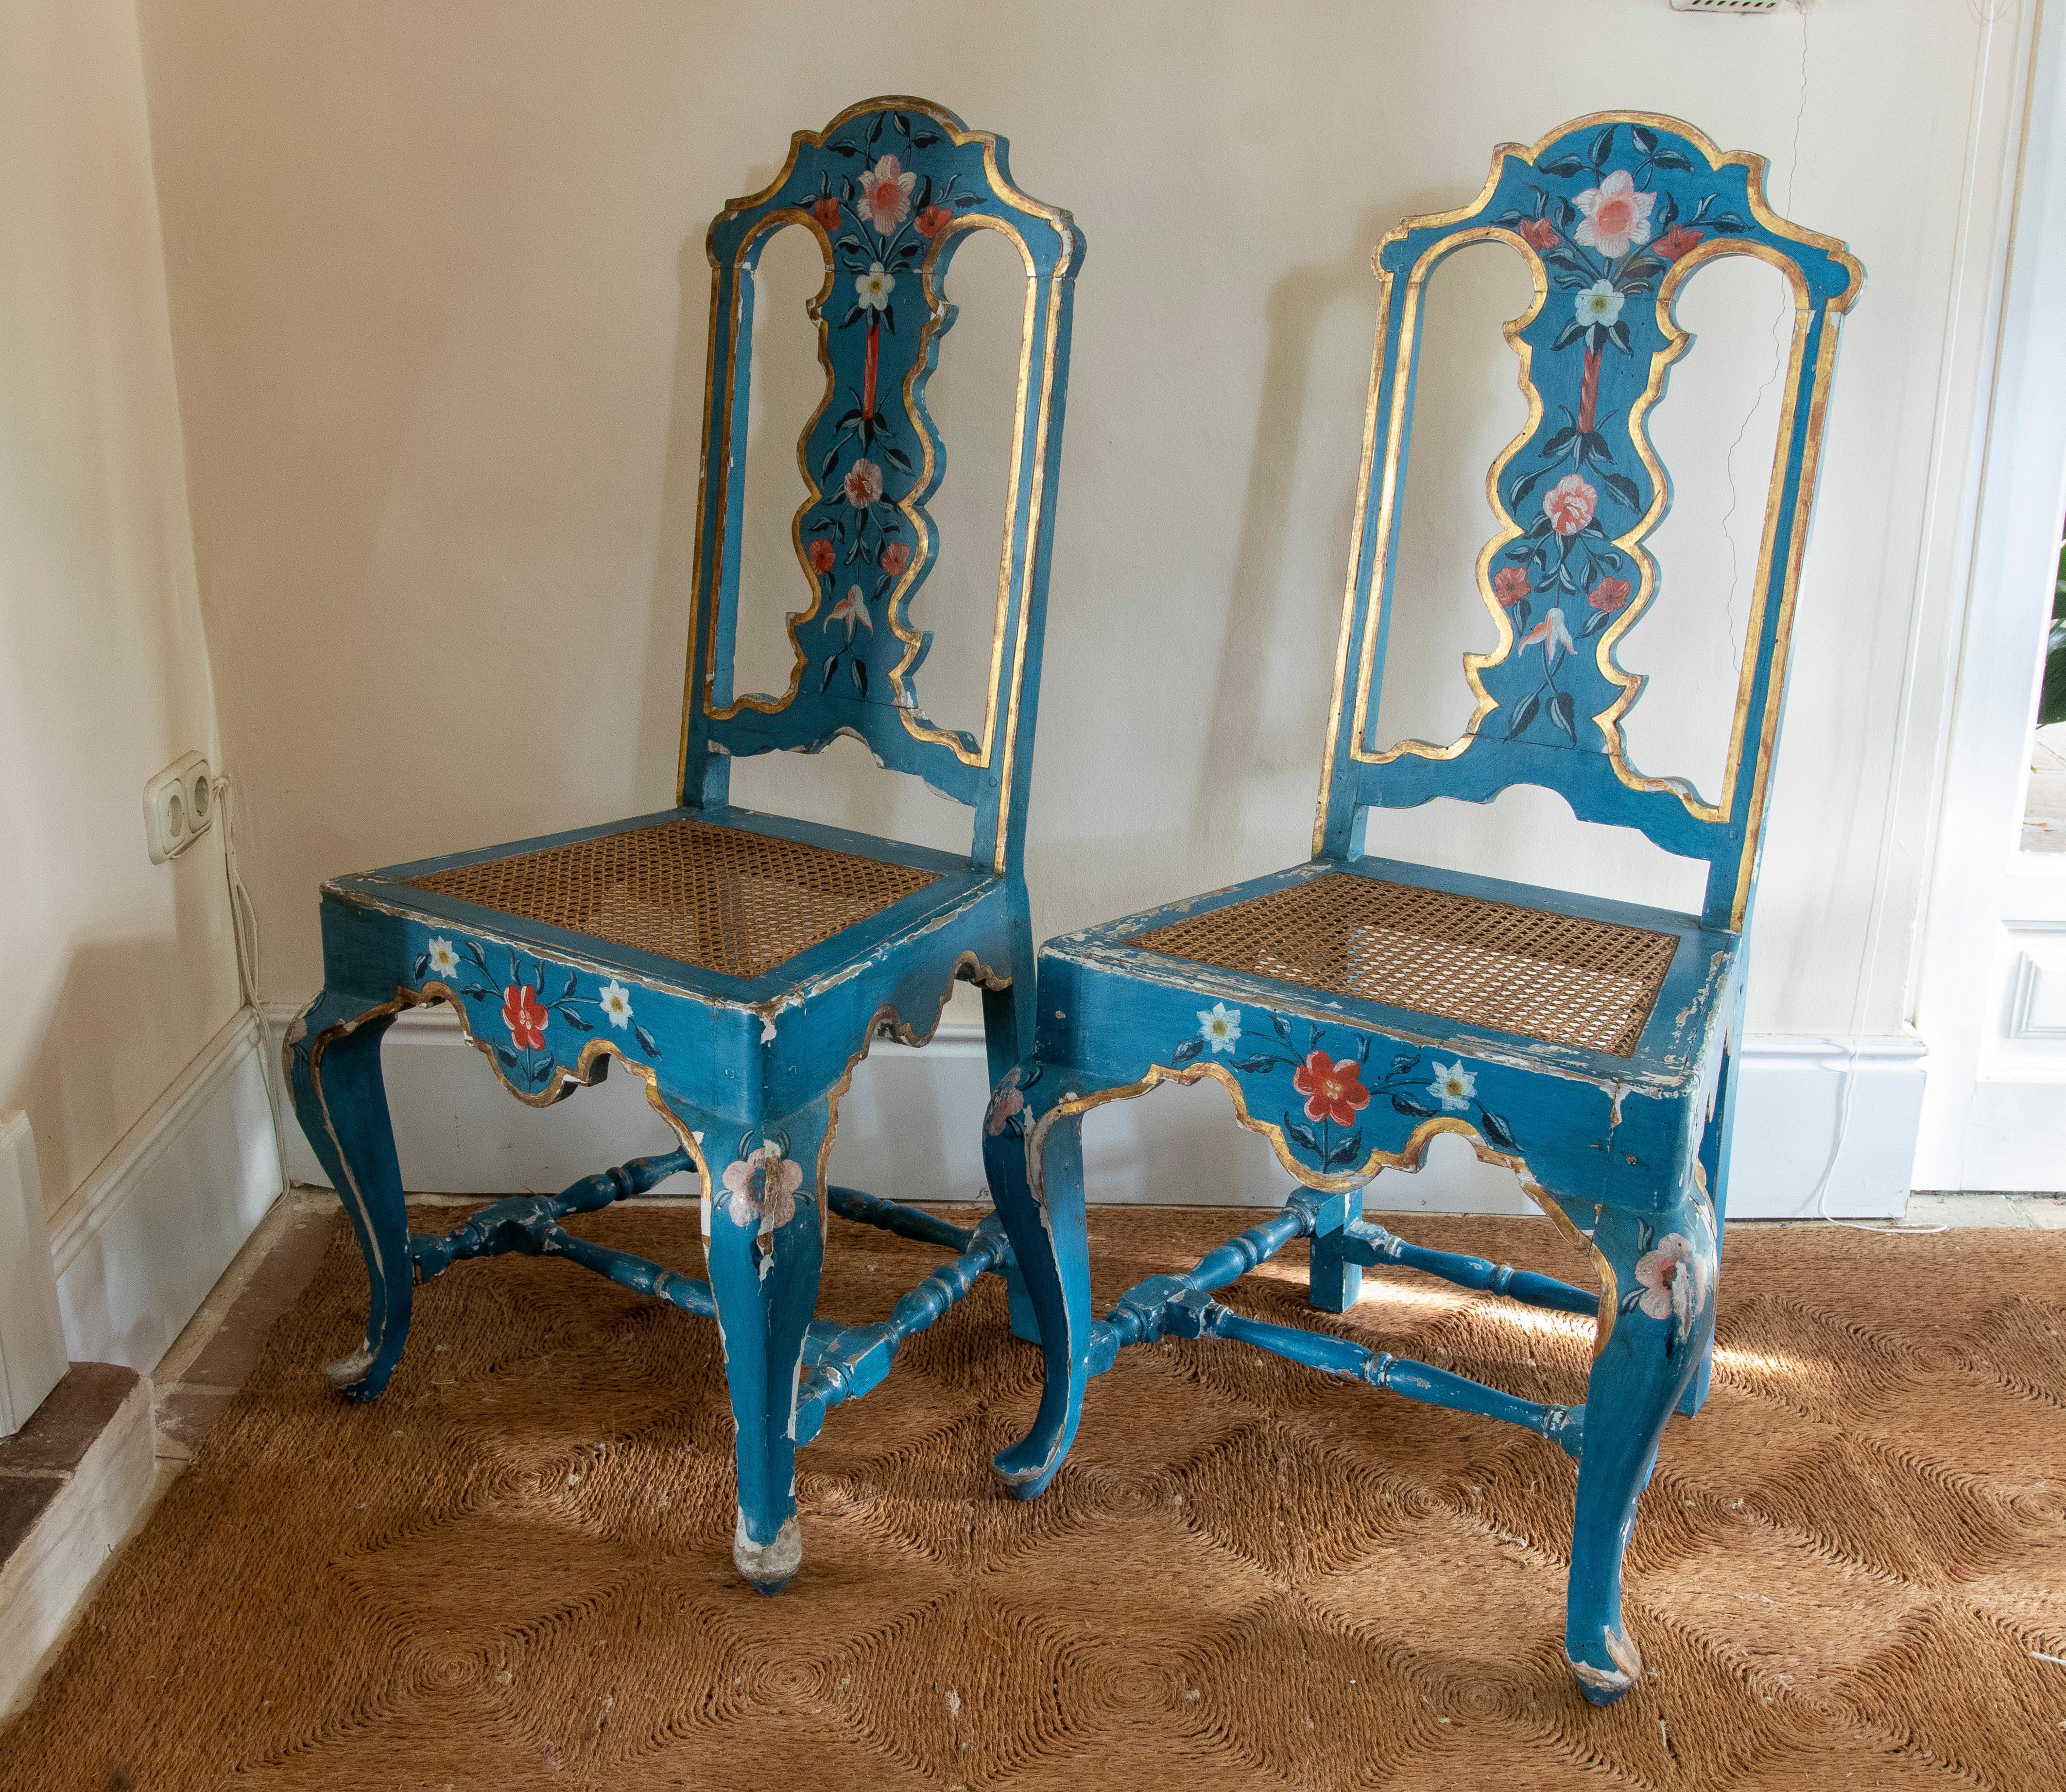 19th Century Andalusian pair of Hand-Painted chairs with Latticework seat.